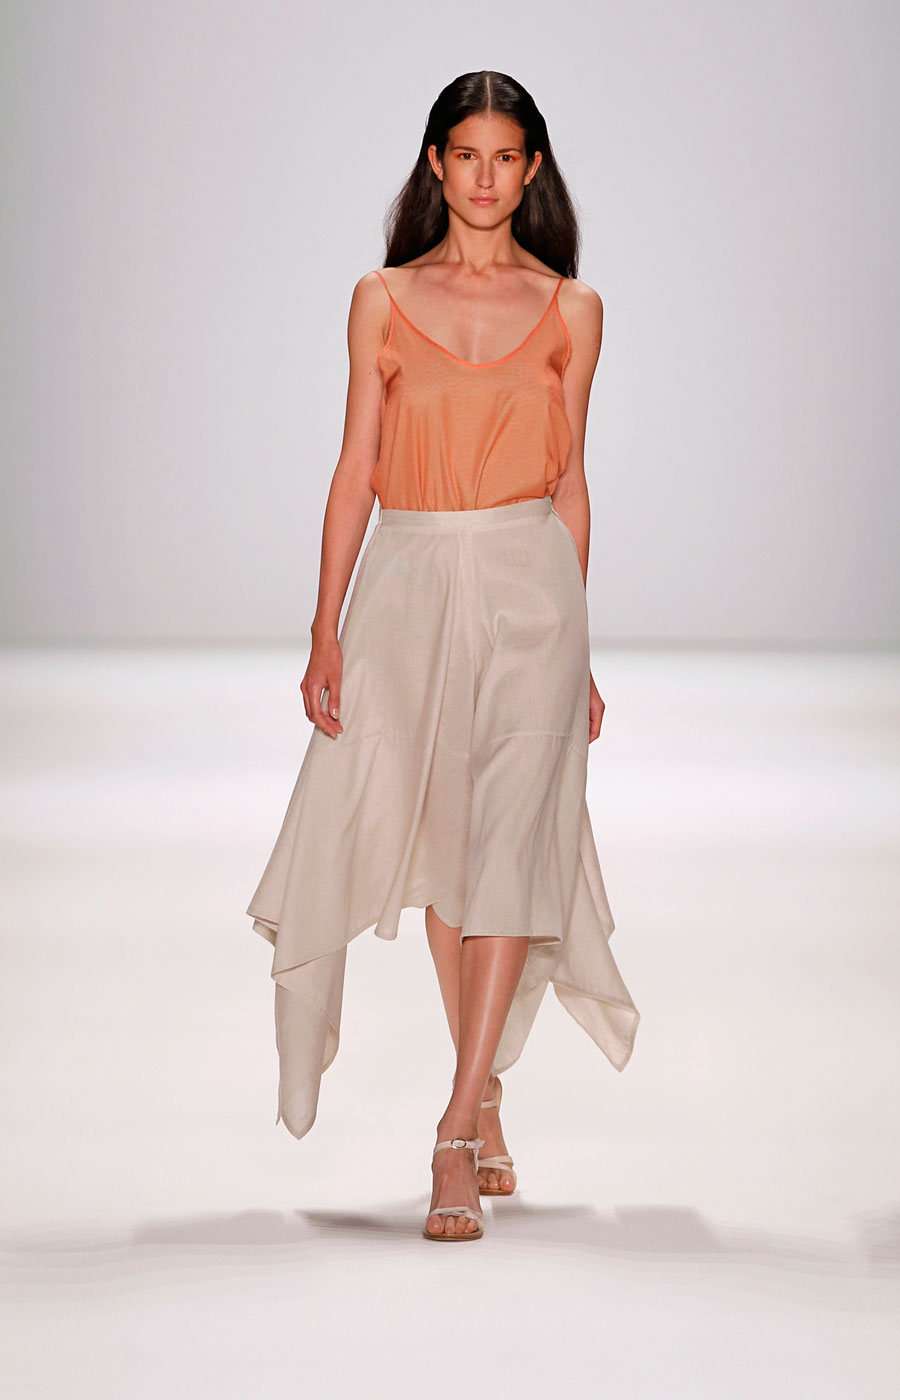 Spring/Summer 2012 by Perret Schaad (6)